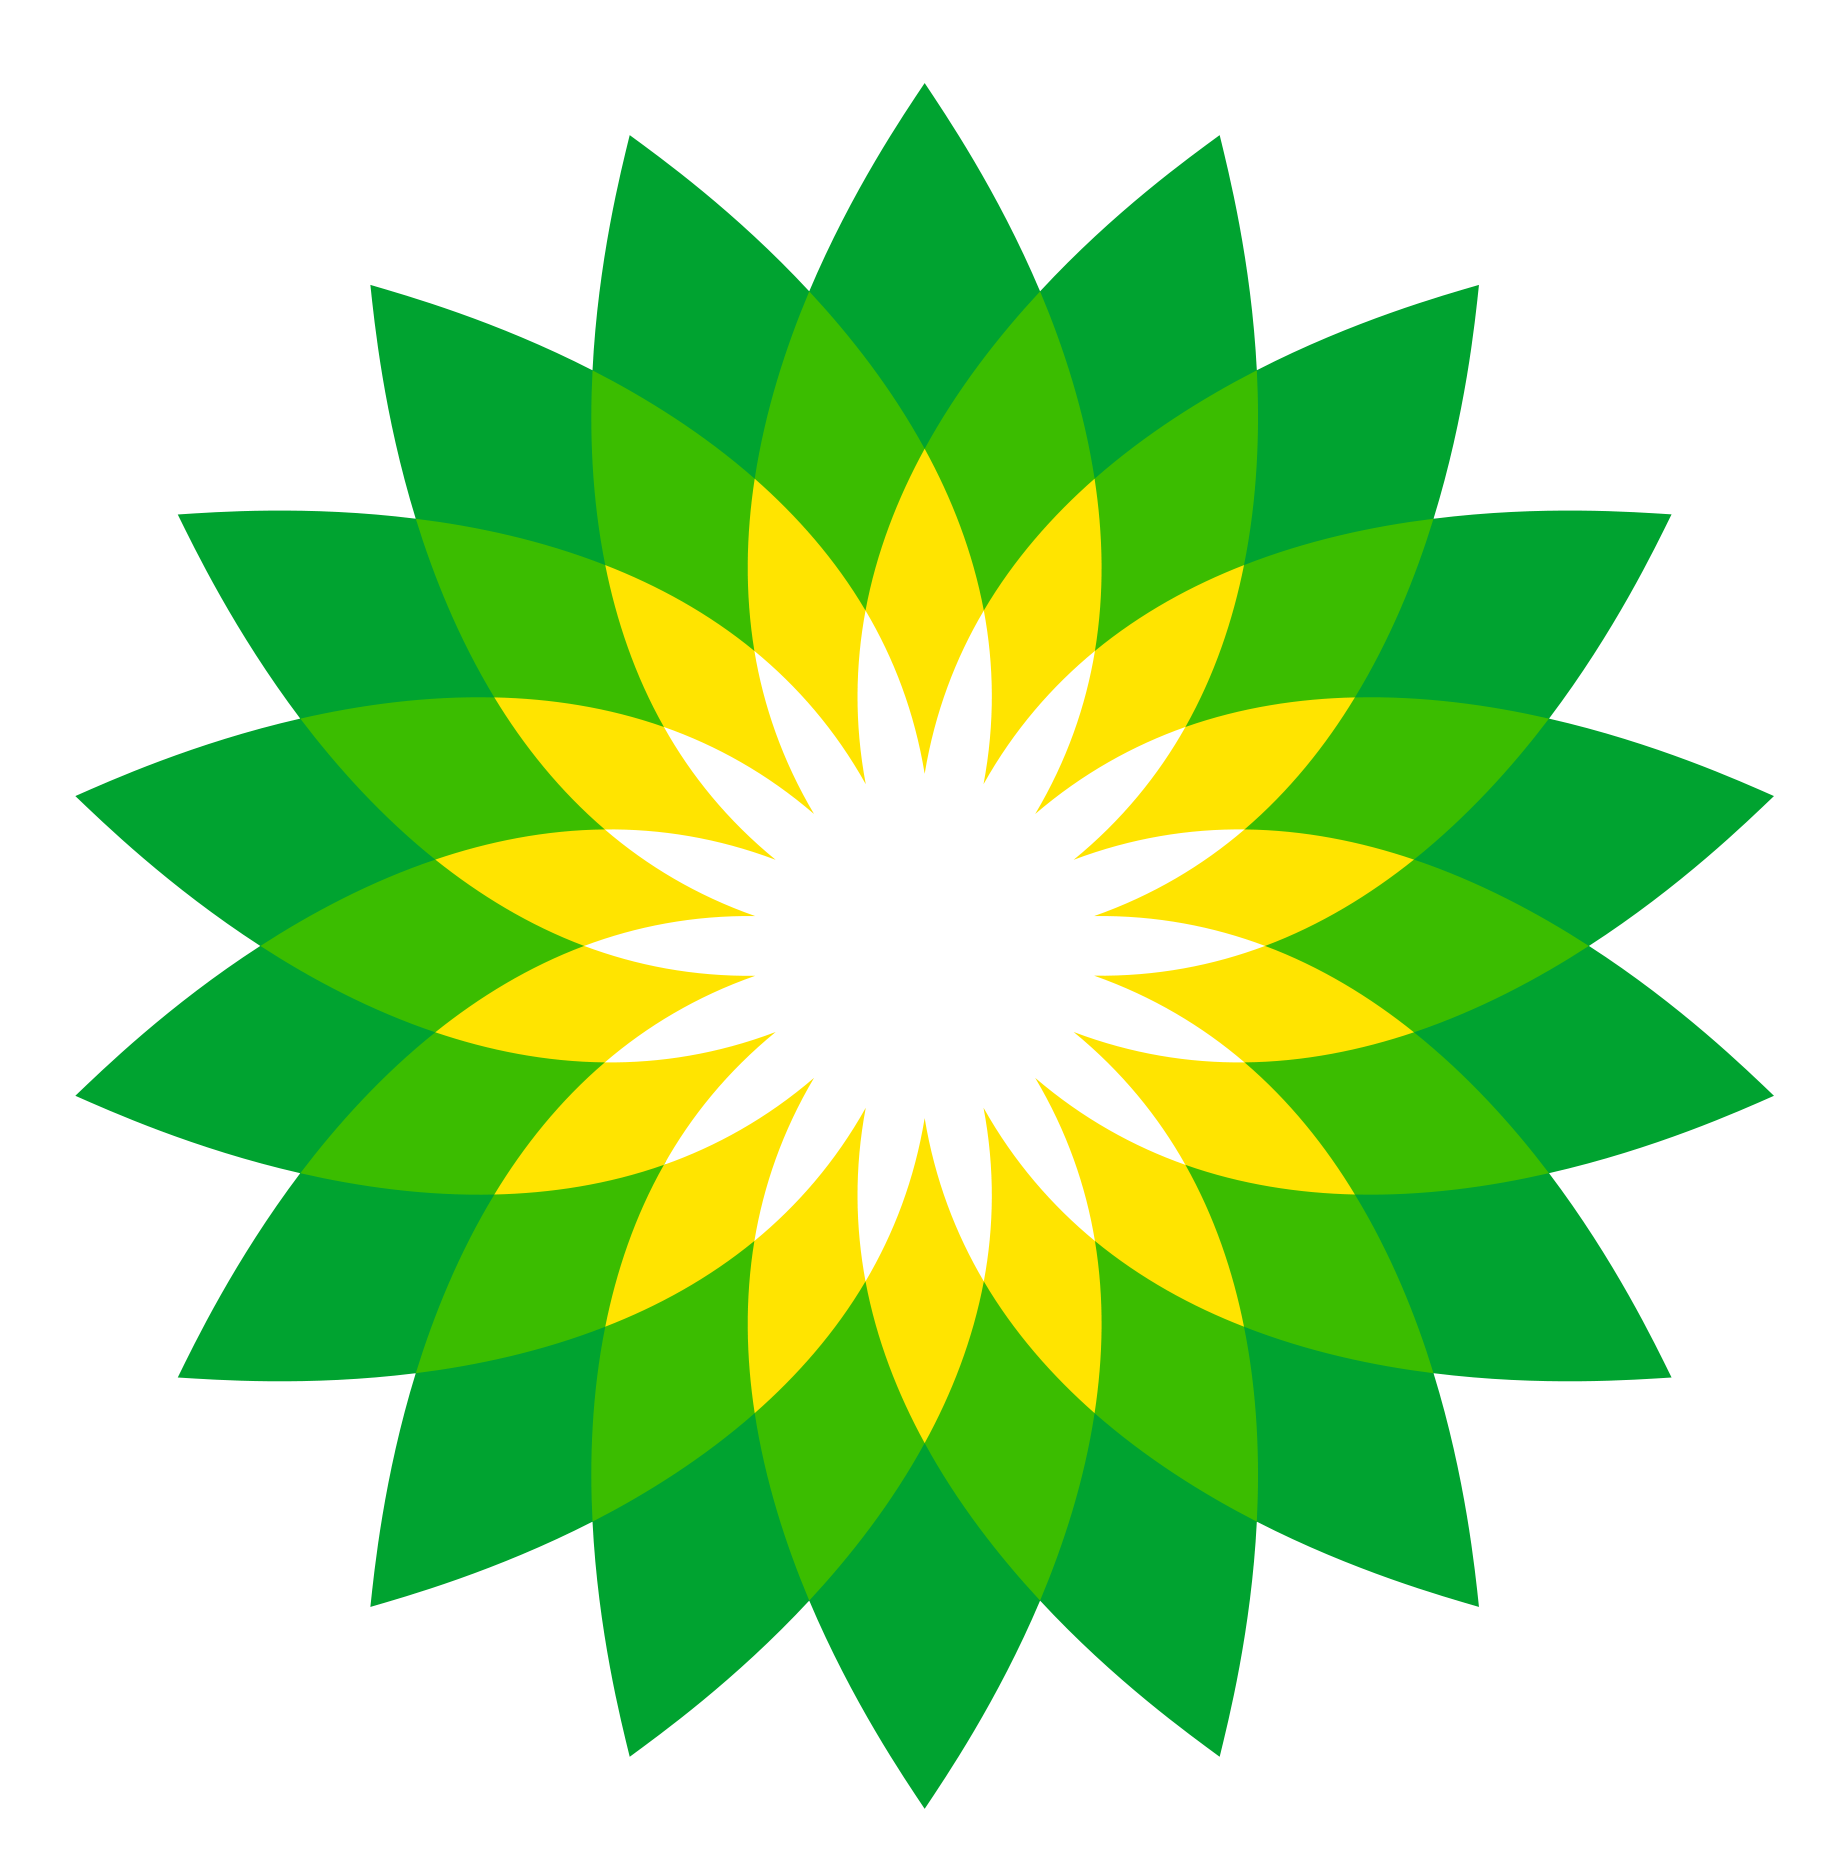 Green and Yellow Starburst Logo - IP Australia rejects BP's green colour mark application | Managing ...